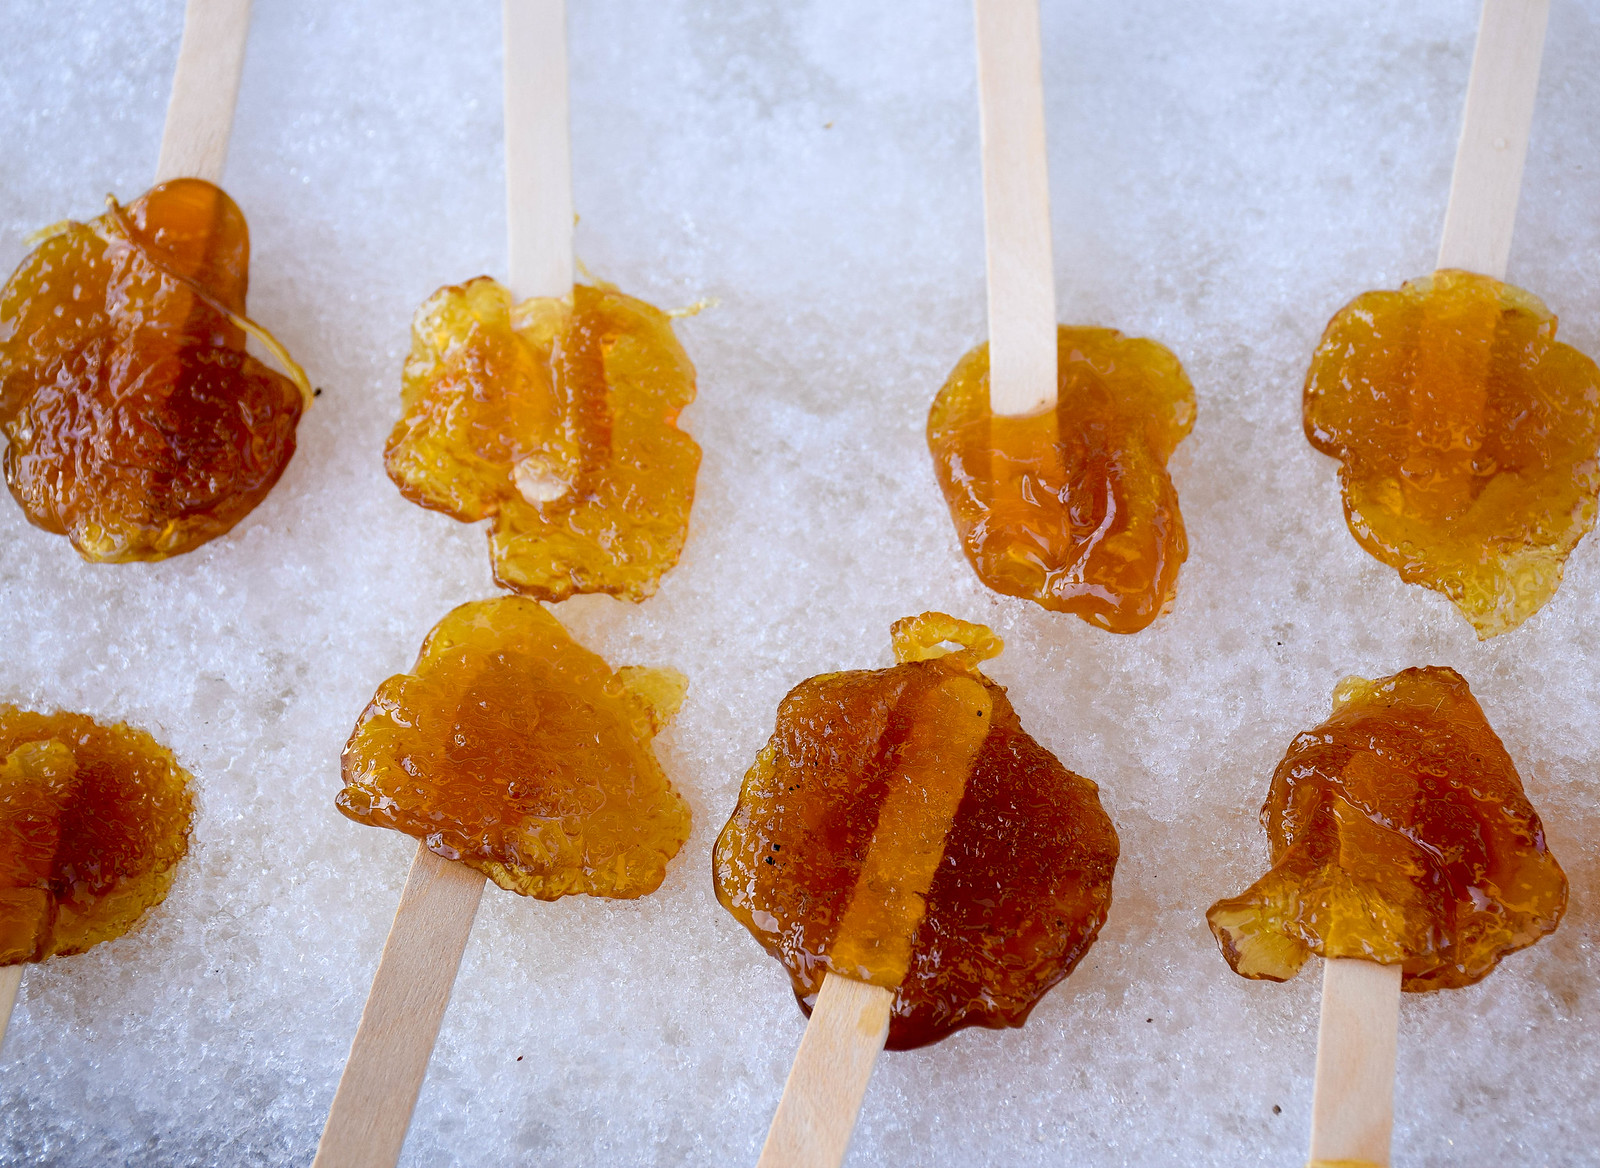 Maple taffy on snow - March is the best time to go to a Sugar Shack in Canada